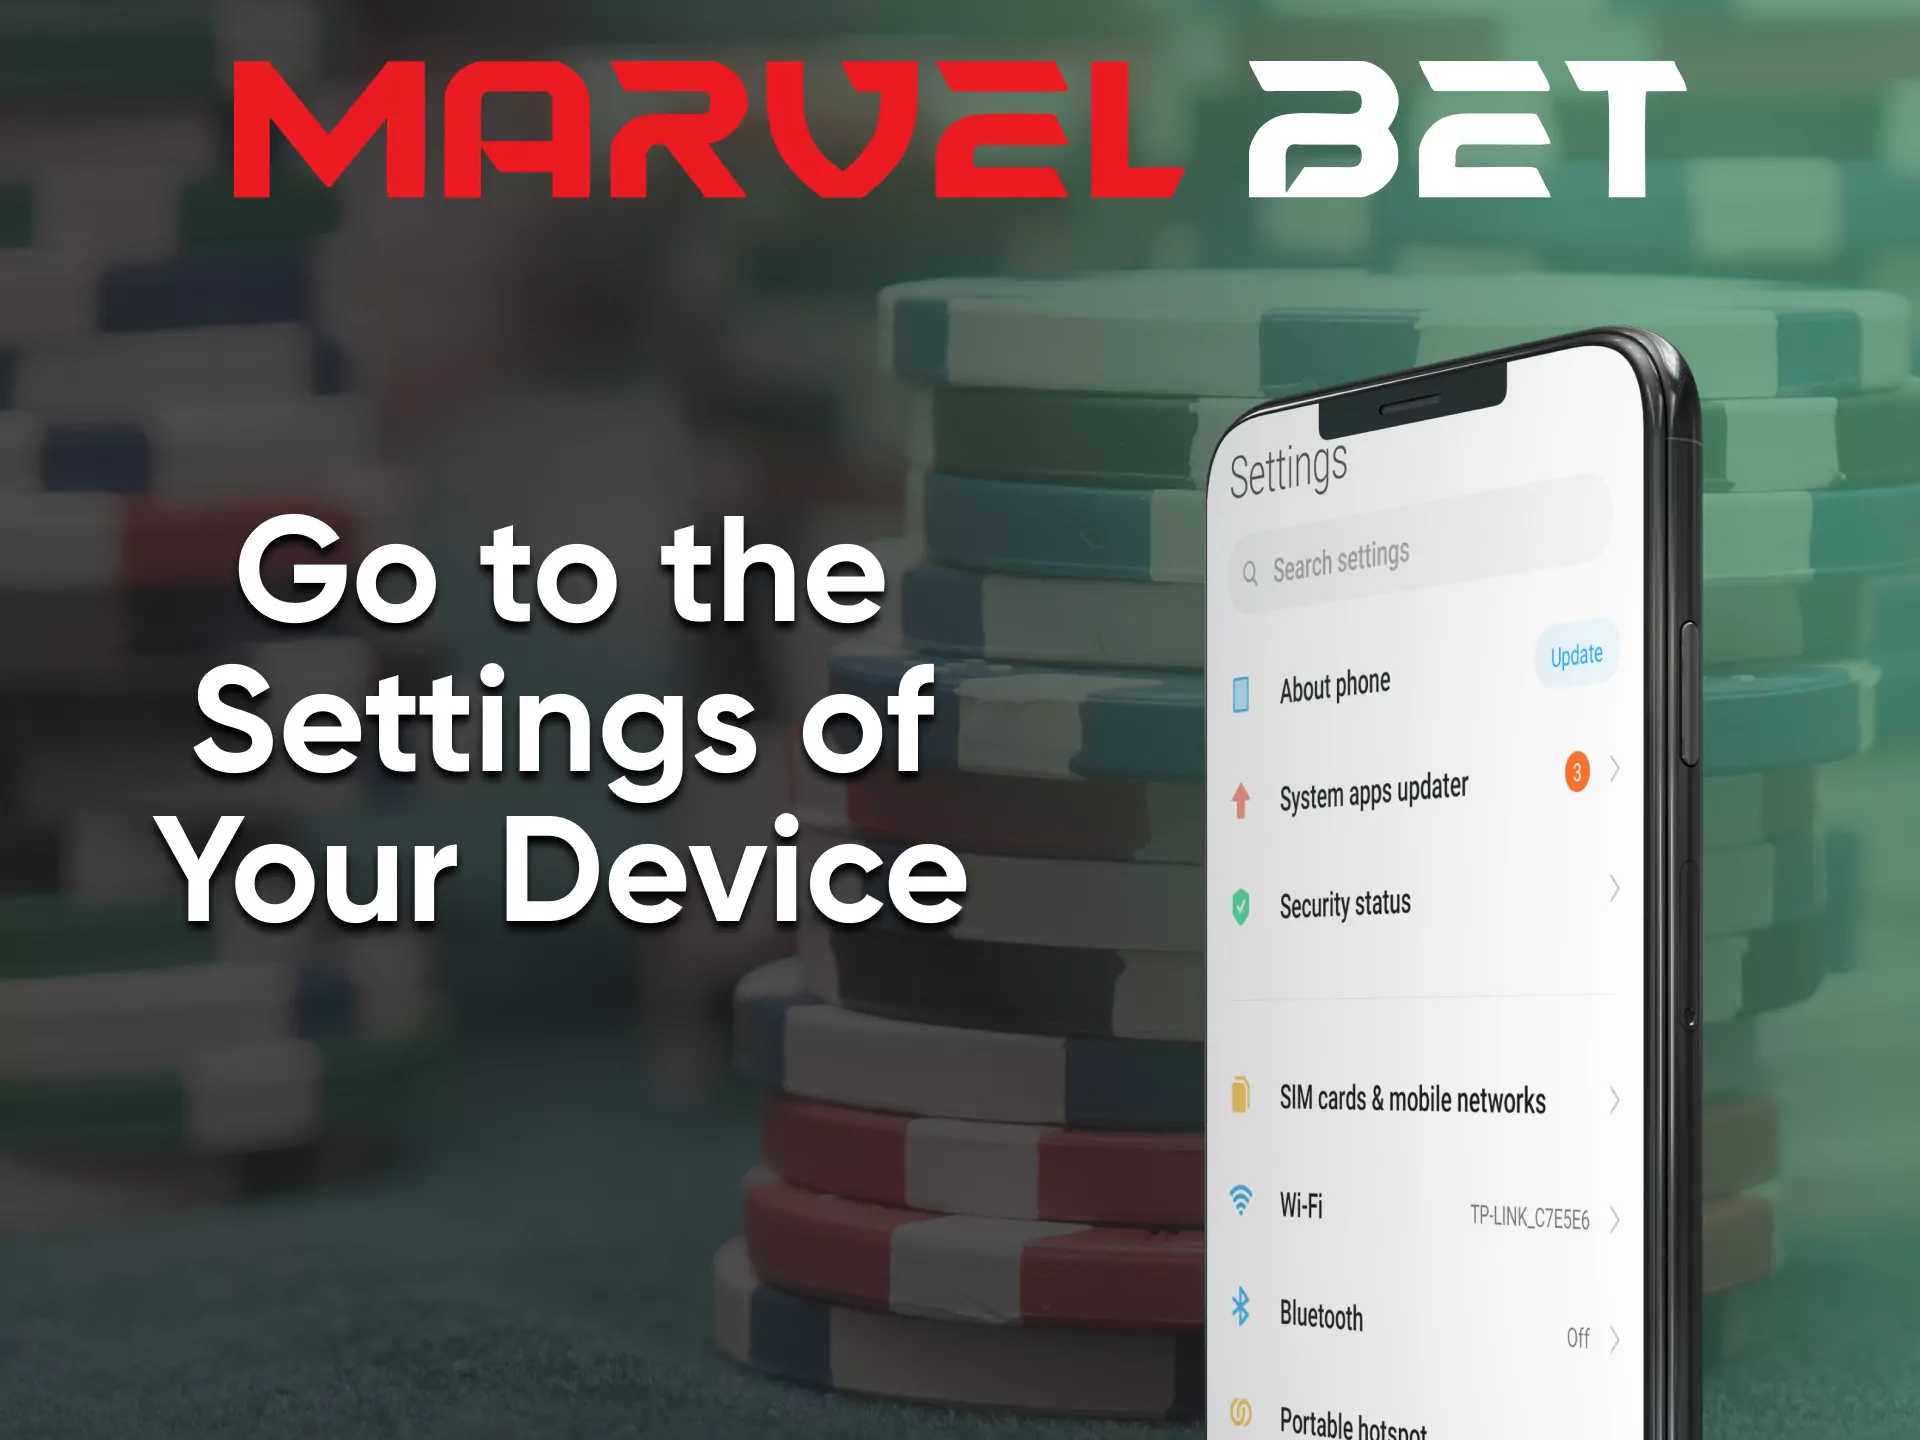 Open access to the application to download, and play in a casino from Marvelbet.